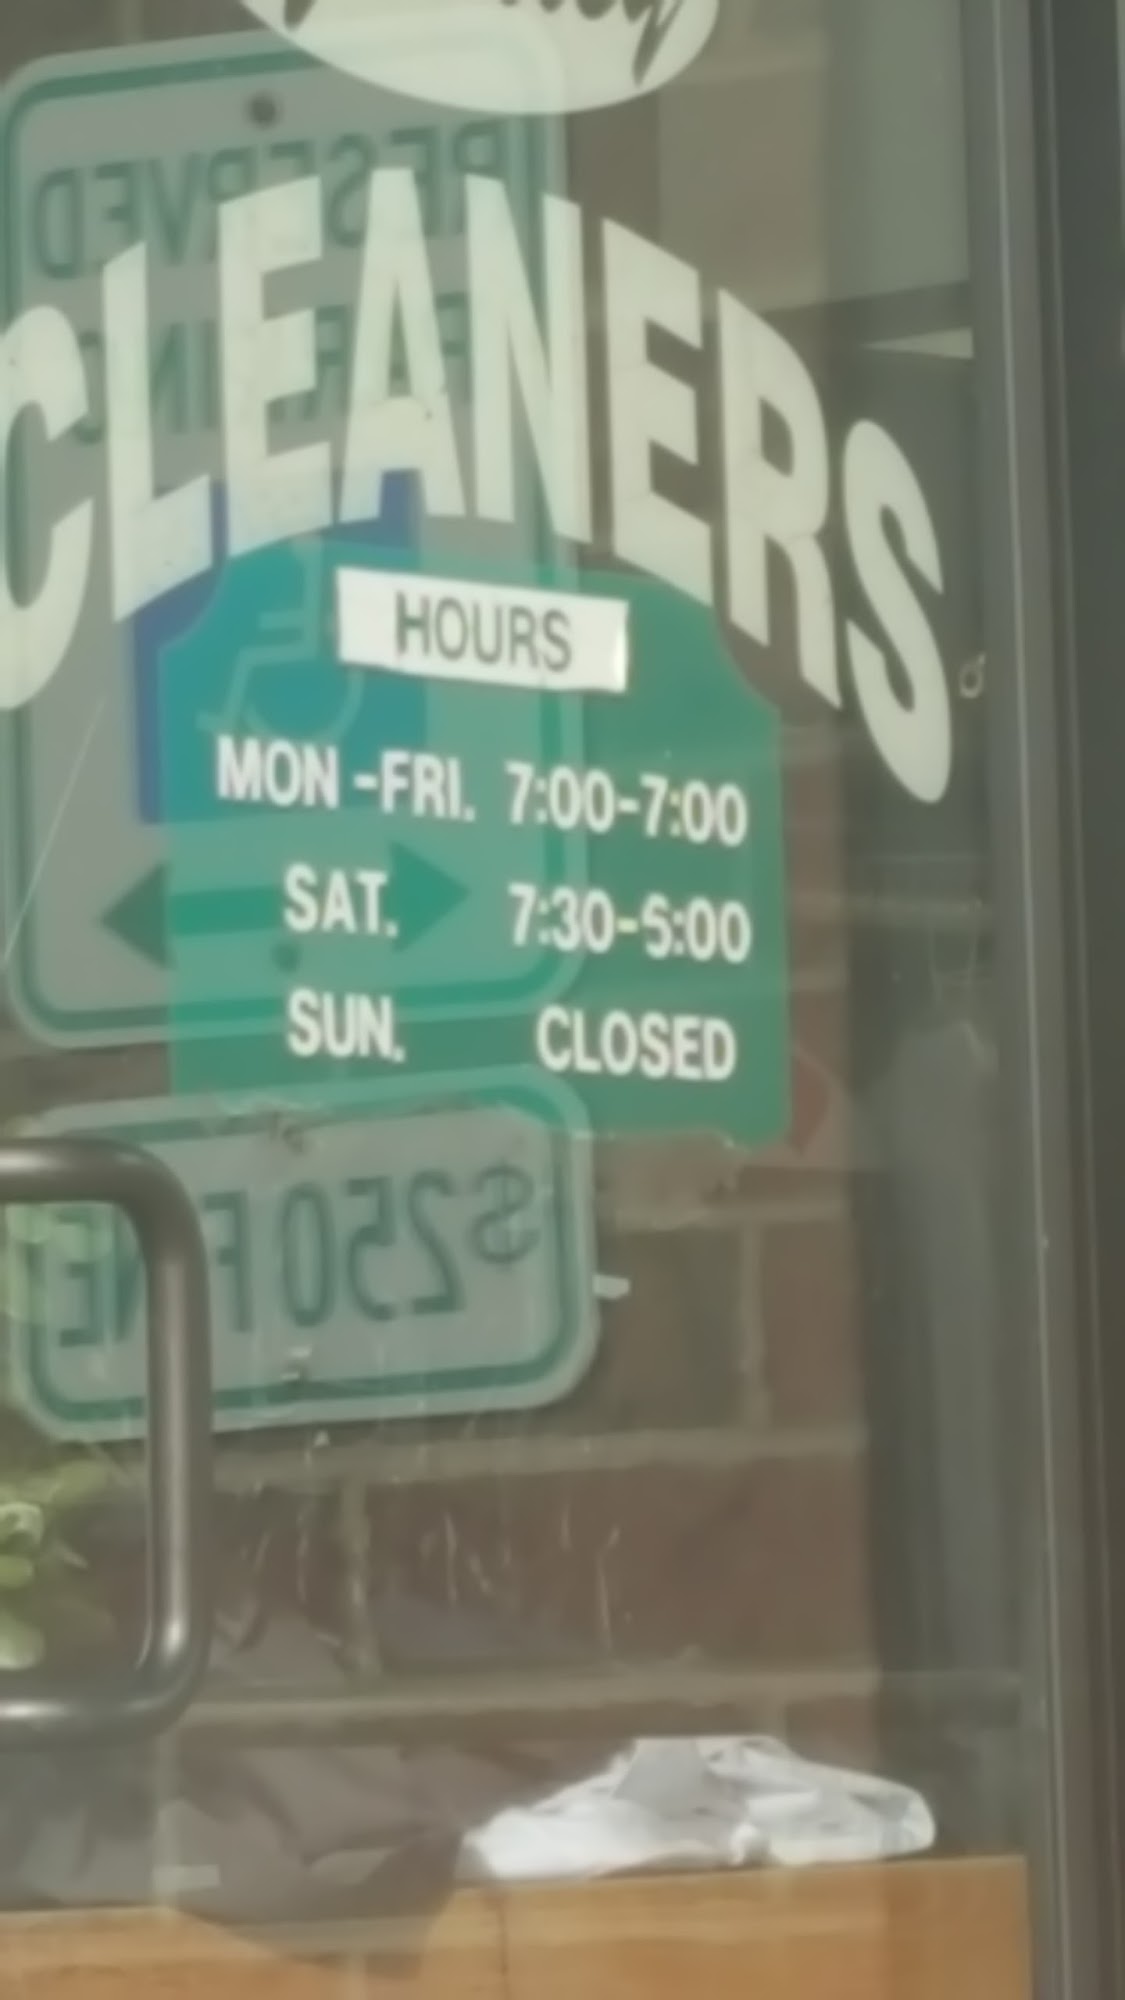 Yackley Cleaners